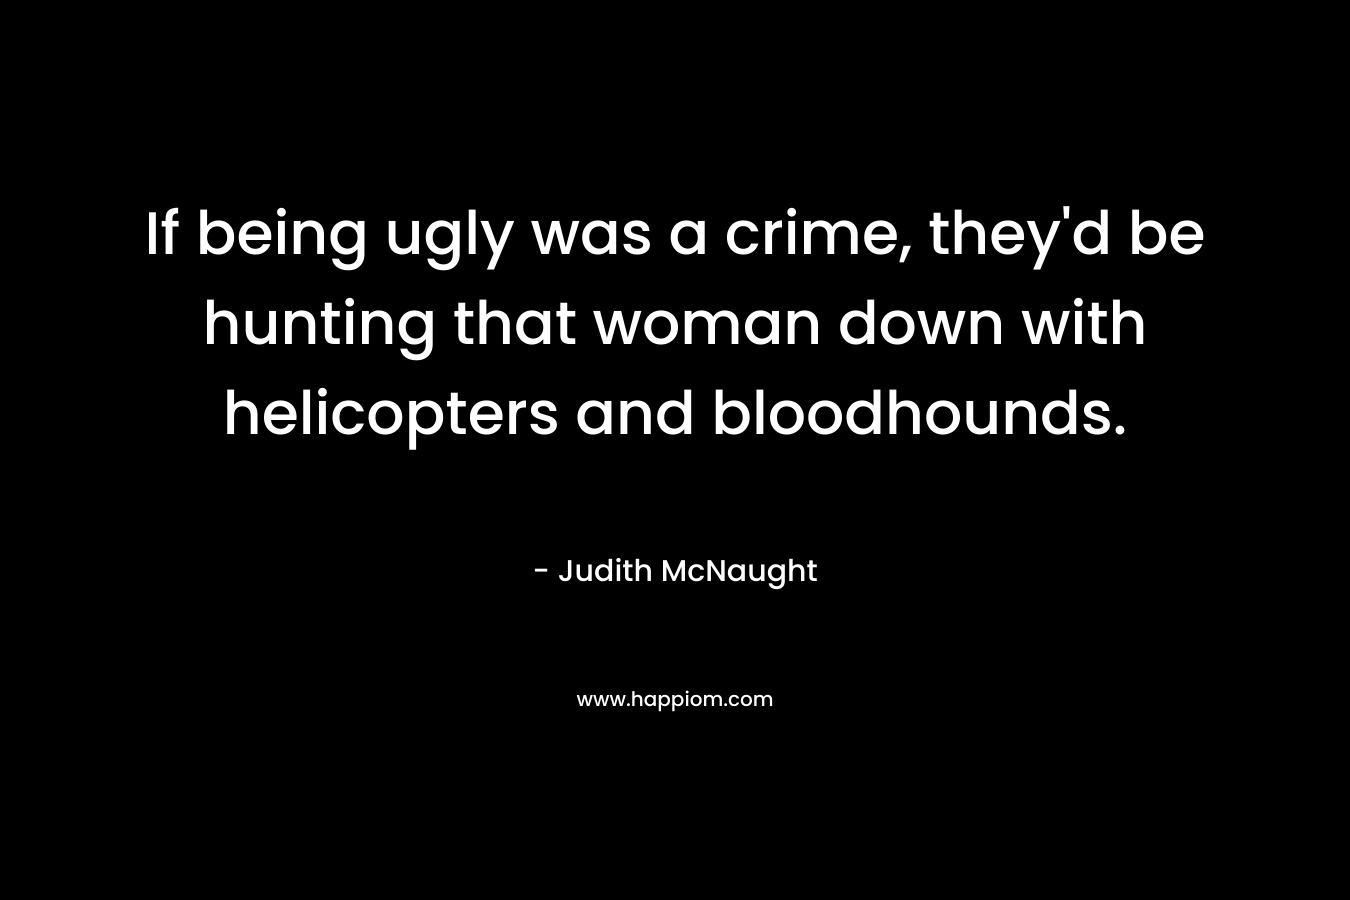 If being ugly was a crime, they’d be hunting that woman down with helicopters and bloodhounds. – Judith McNaught